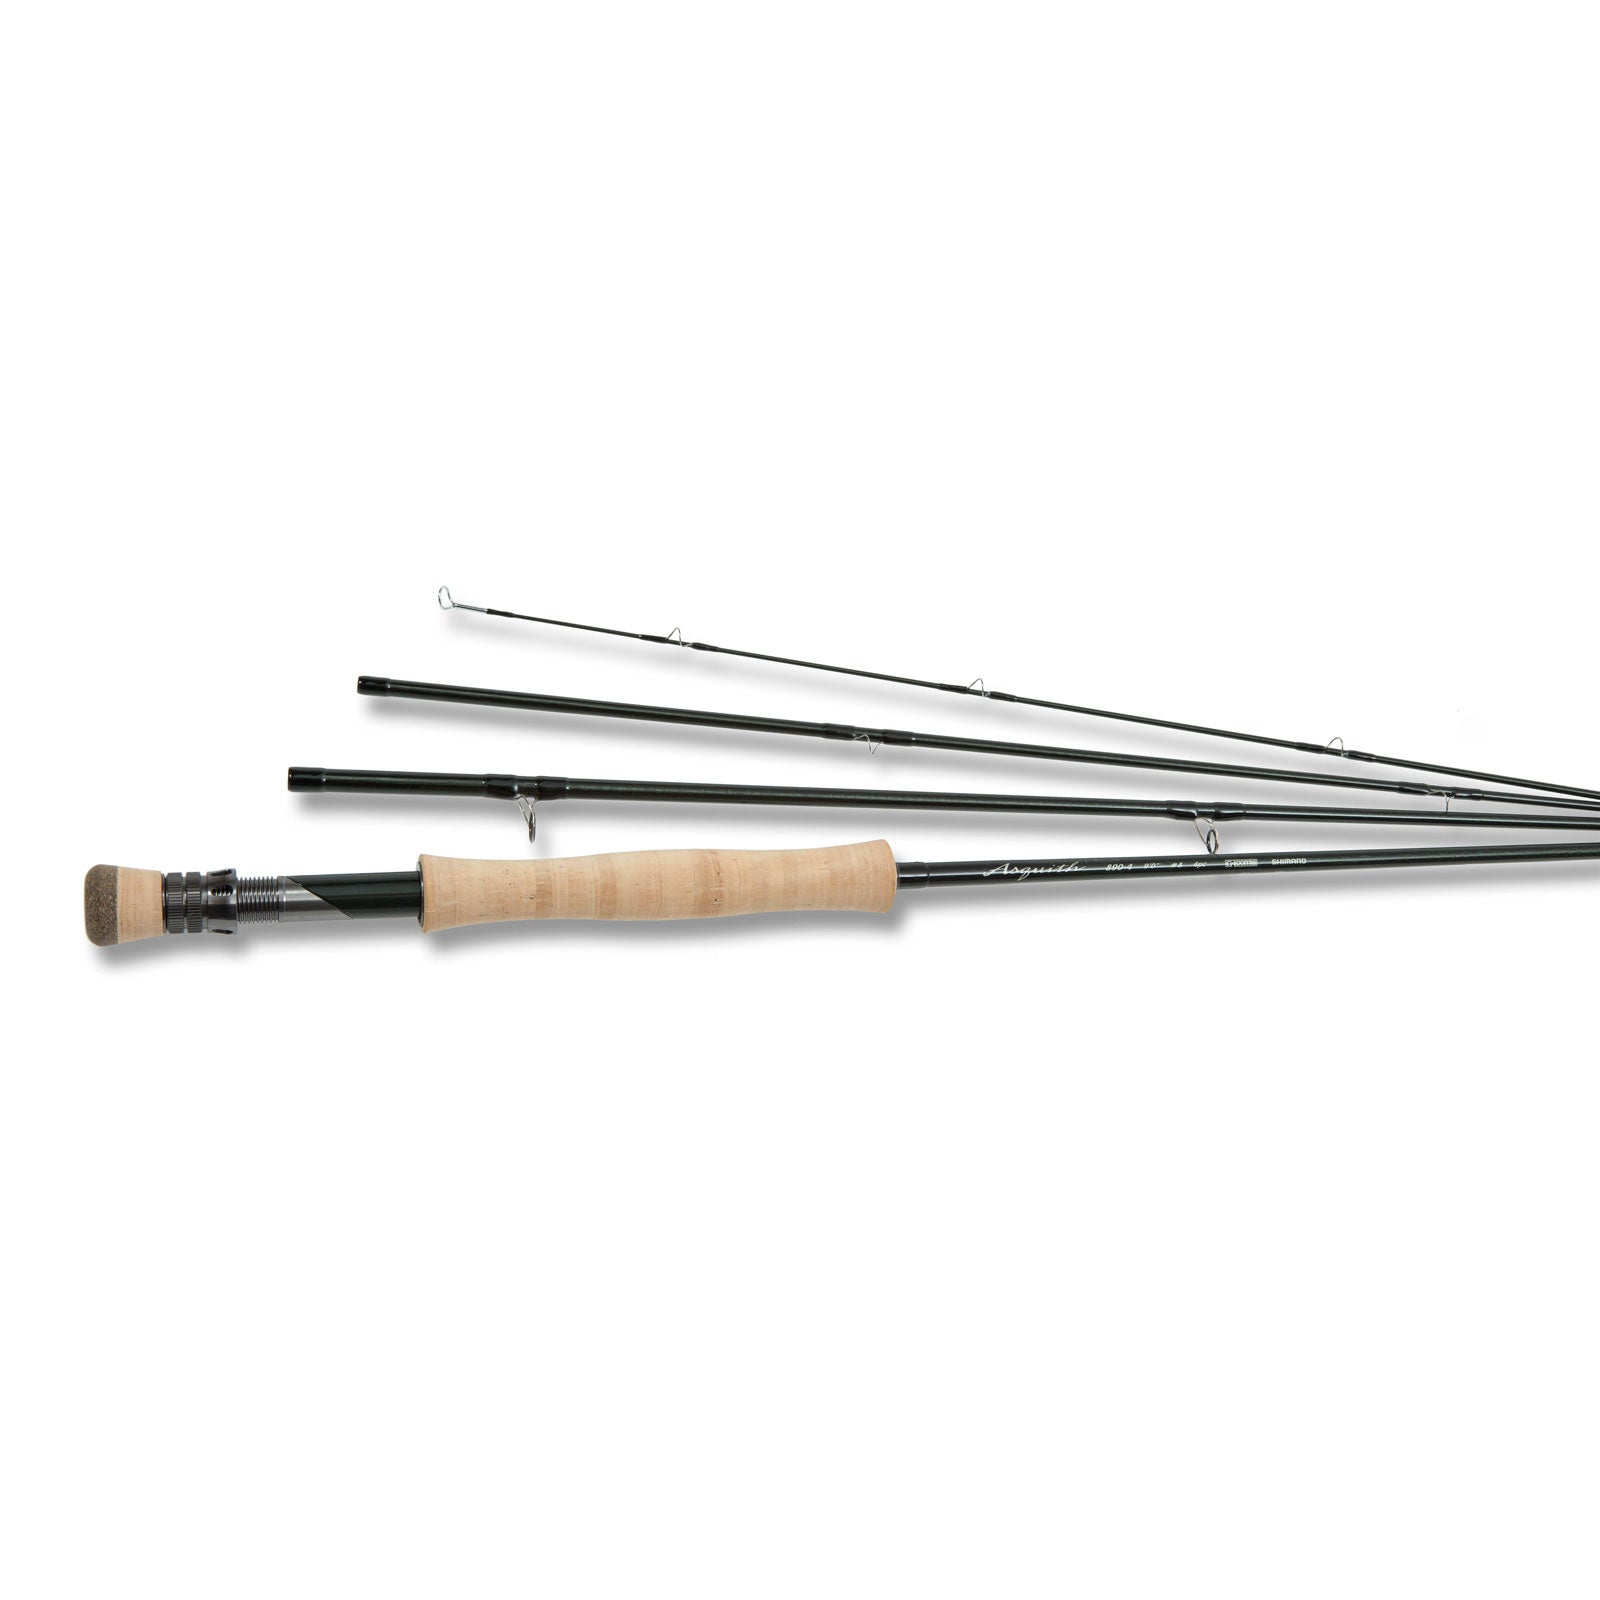 G. Loomis Asquith 8wt Fly Rods - Clearance